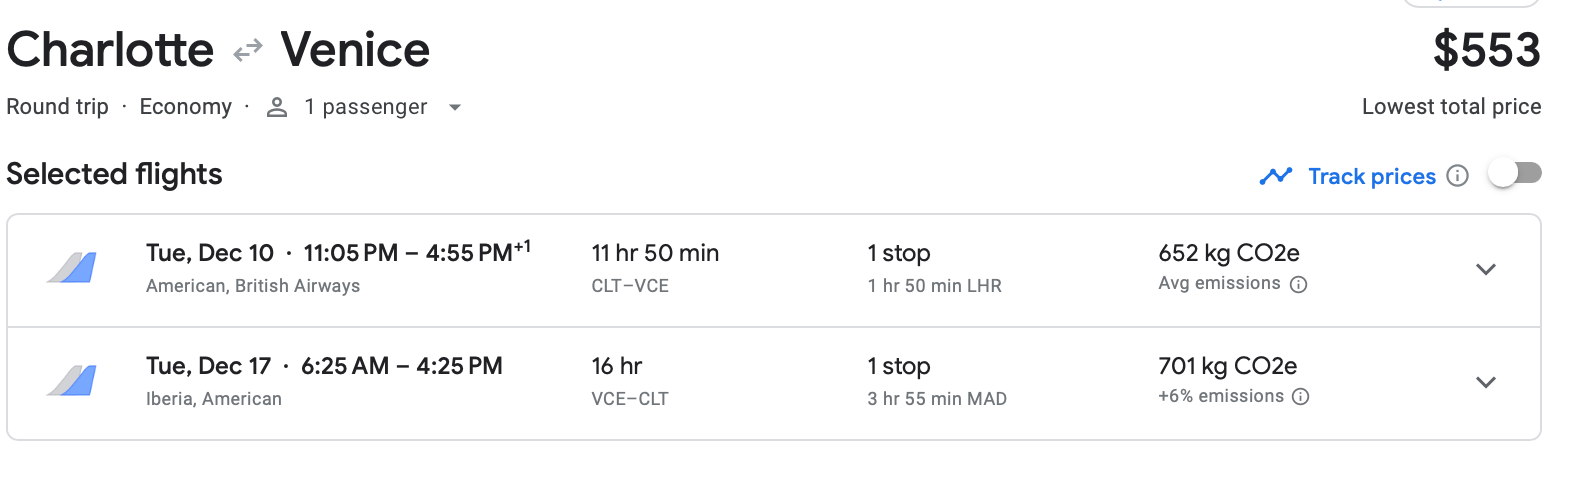 A screenshot of a Google Flights deal for a round-trip flight from Charlotte to Venice.